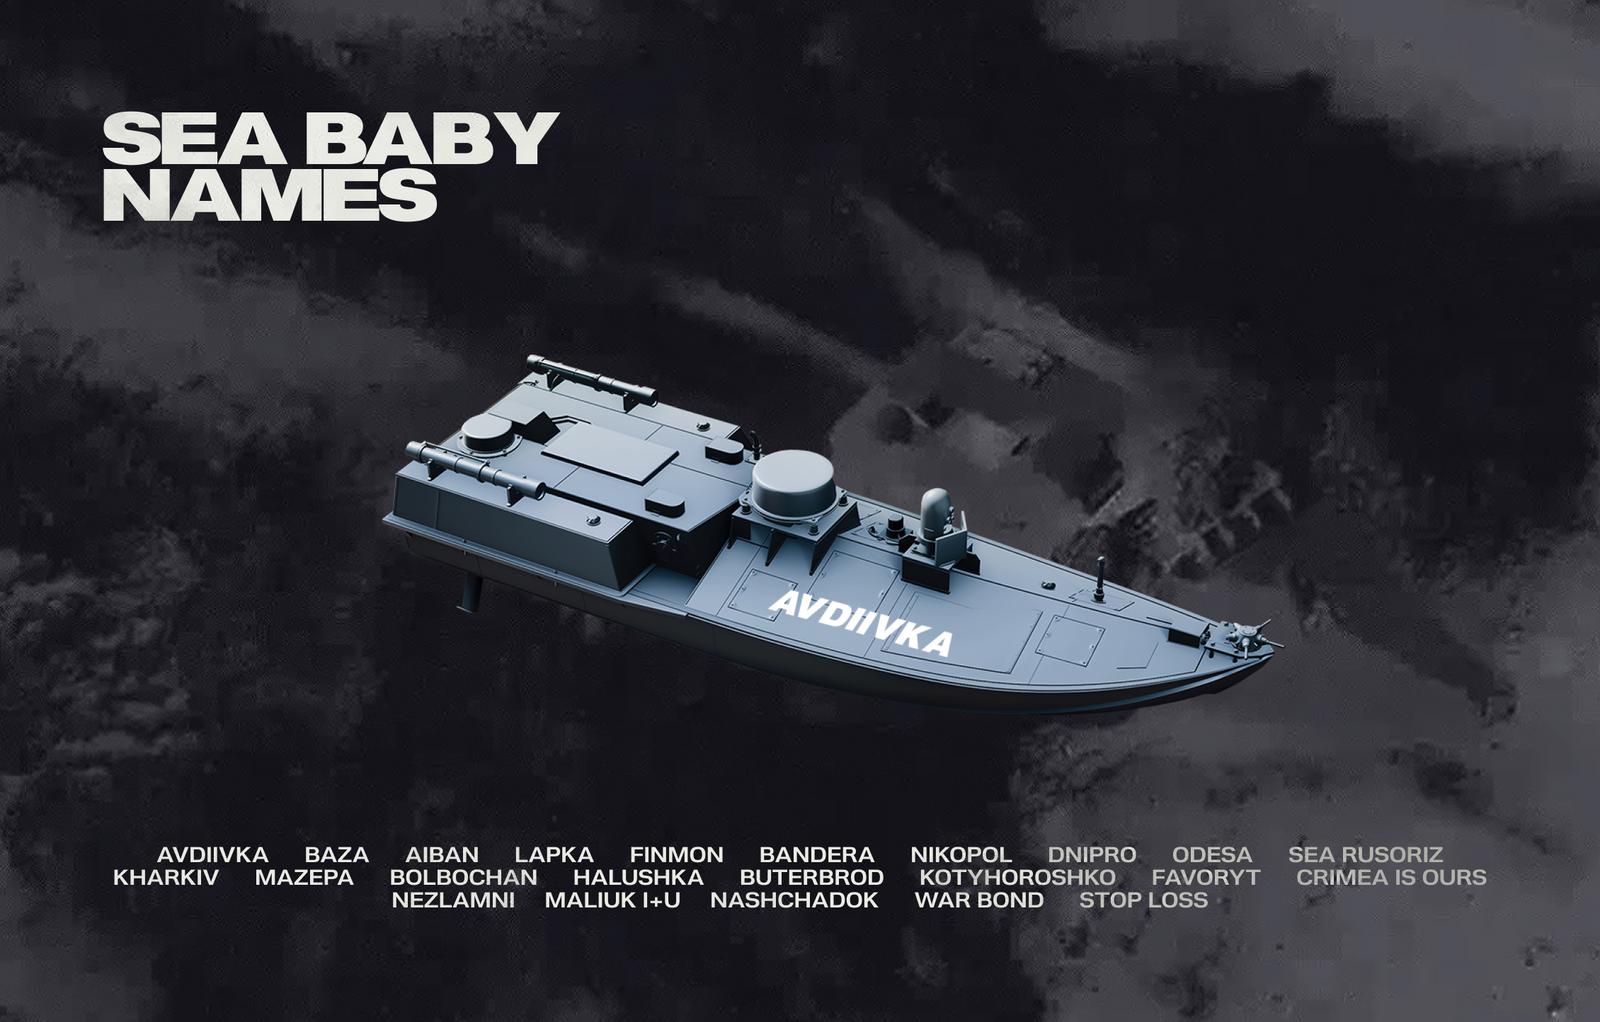 Introducing our ‚newborn‘ Sea Babies